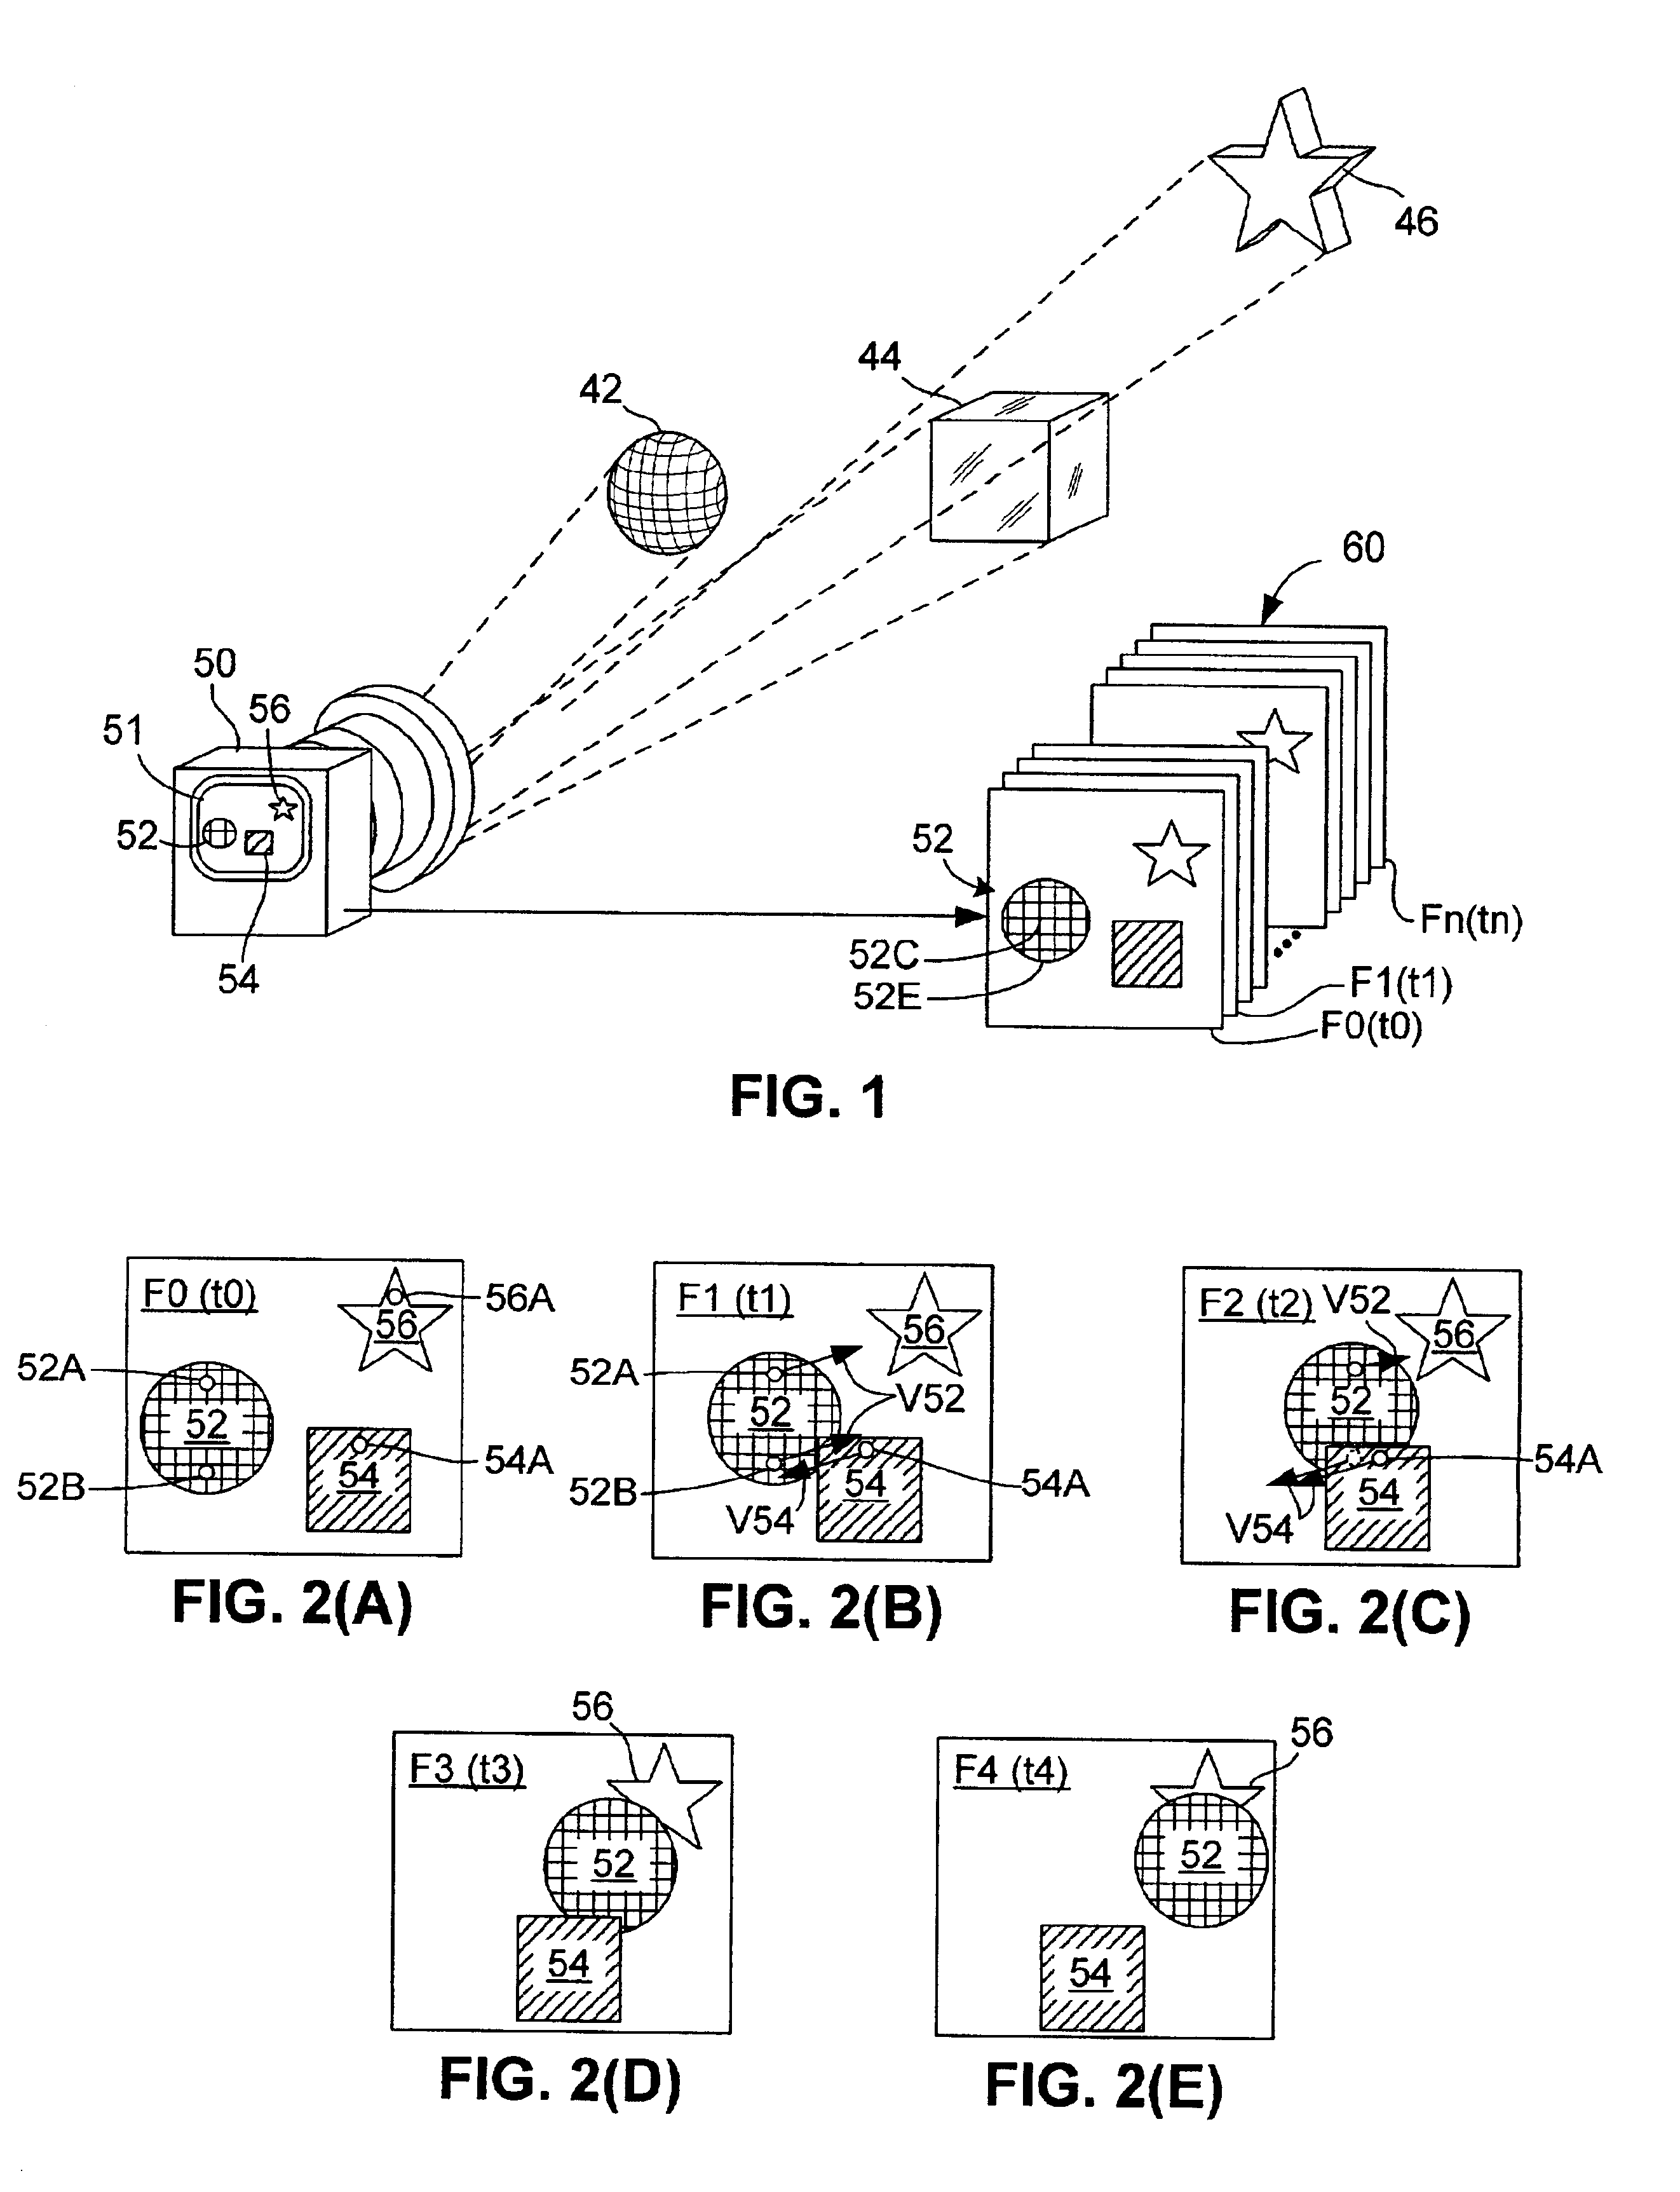 Visual motion analysis method for detecting arbitrary numbers of moving objects in image sequences